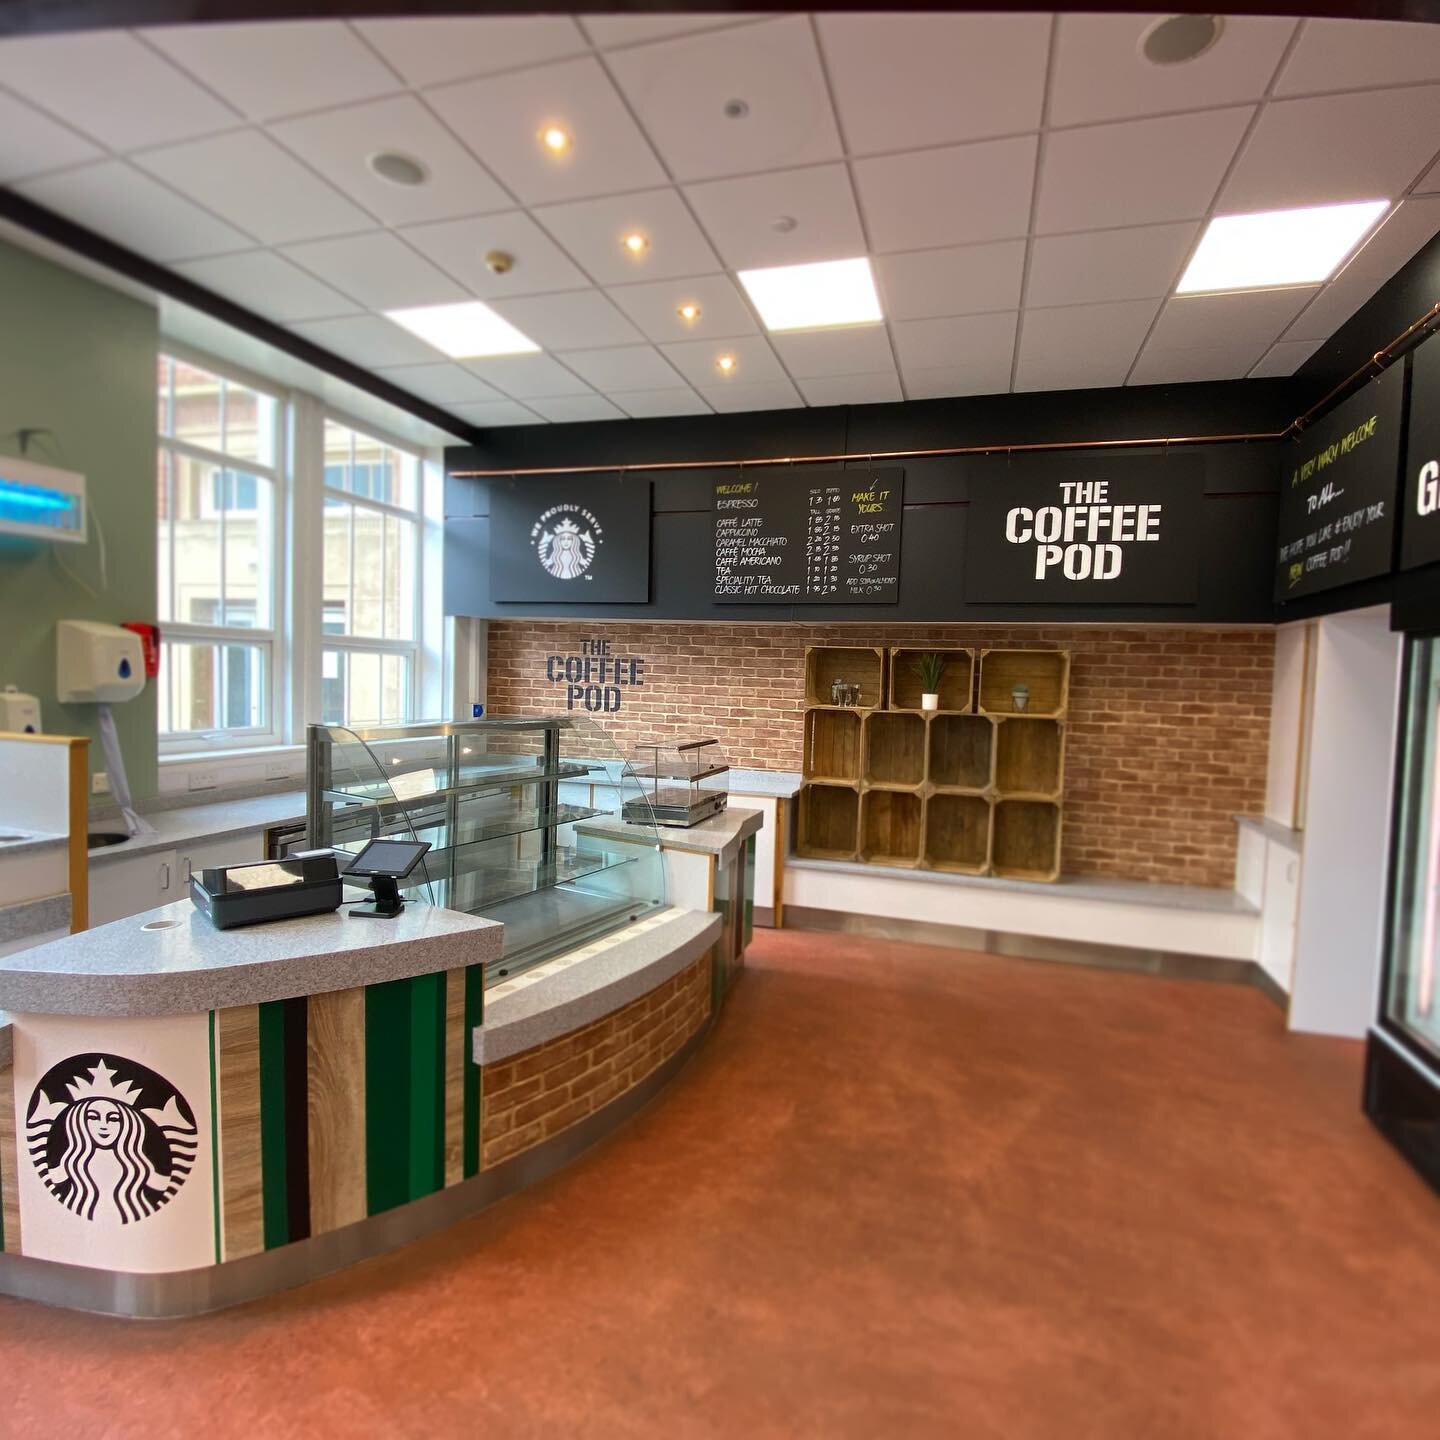 Recently completed quick turnaround and cost effective makeover of the Coffee Shop at Southport college. All graphic design, interior design, sign written chalkboards and vinyl wraps by team Chalk &amp; Cheese. #southportcollege #coffeeshopdesign